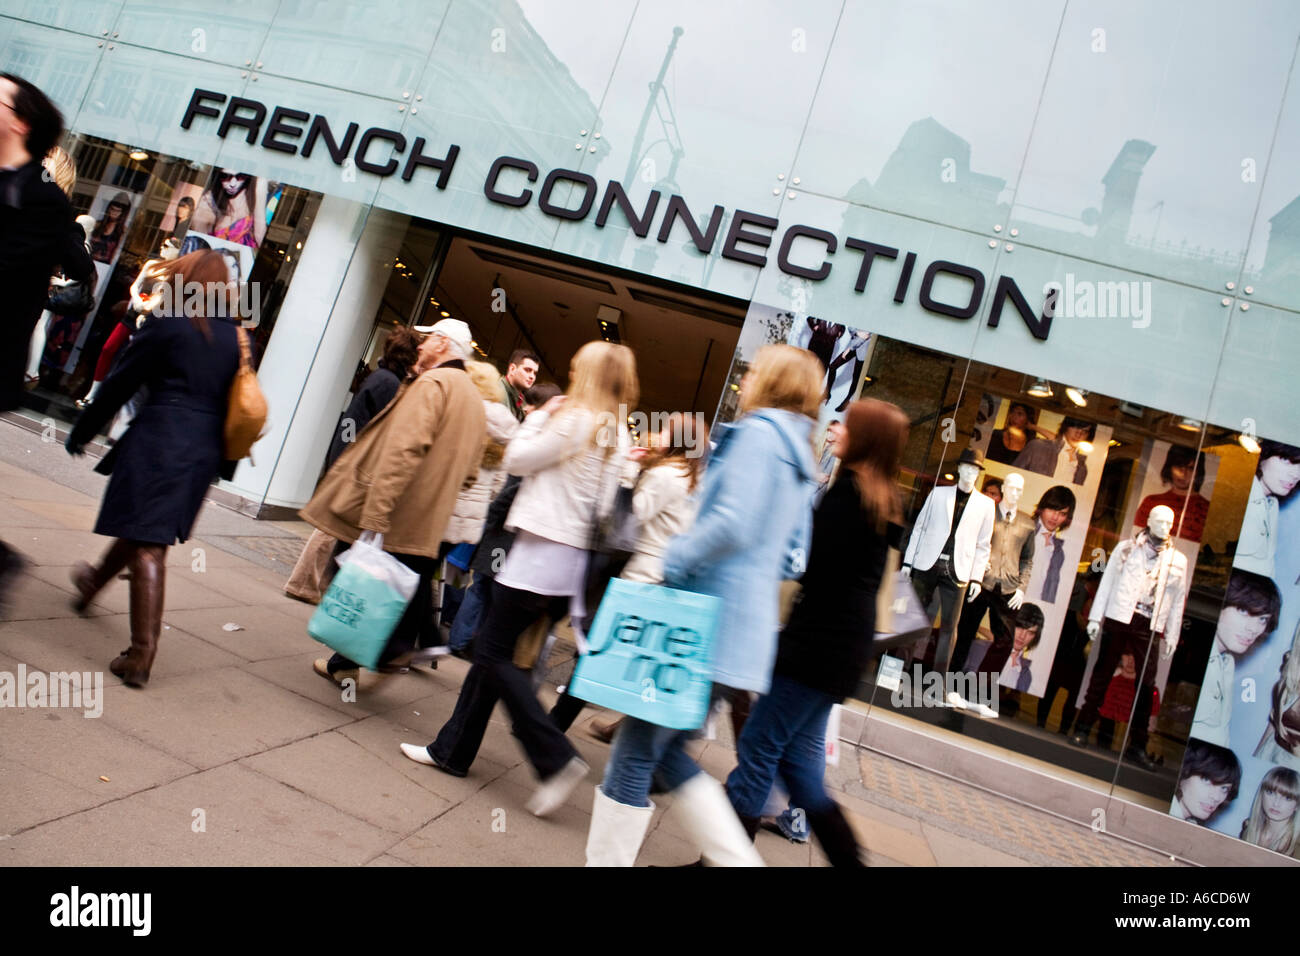 French Connection shop on Oxford Street Stock Photo